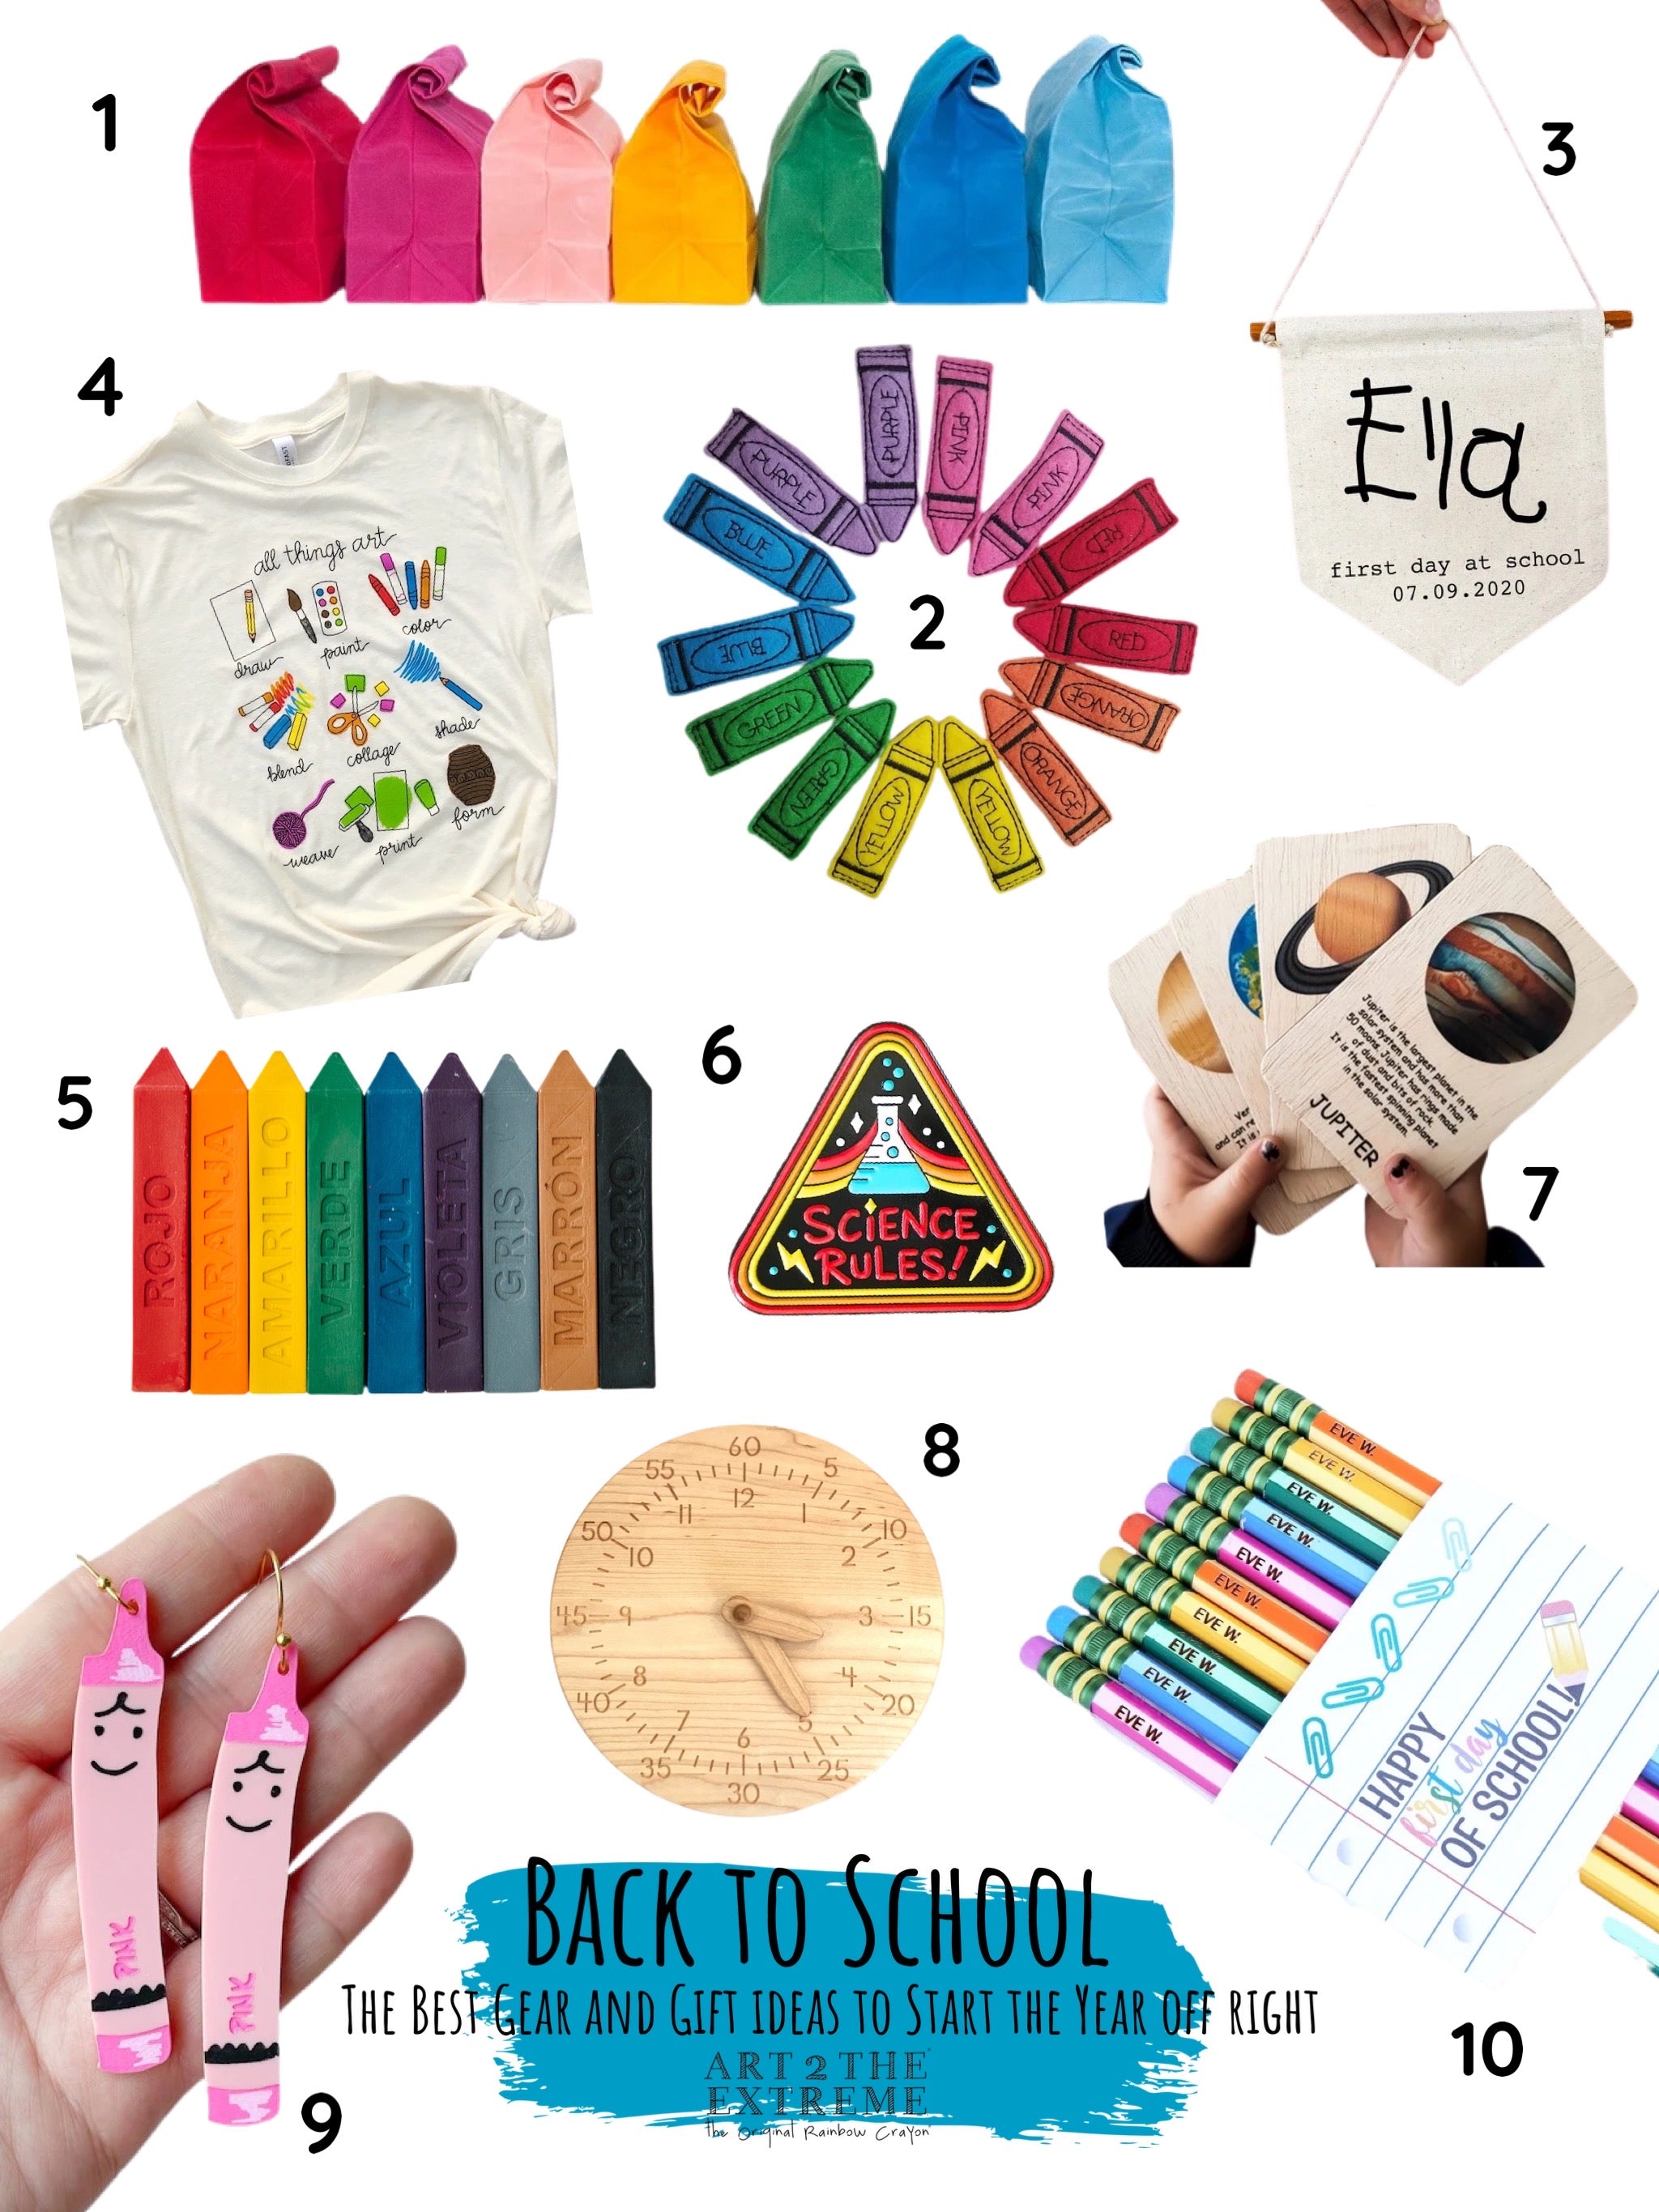 The Best Arts & Crafts Supplies & Gift Ideas For Kids - From